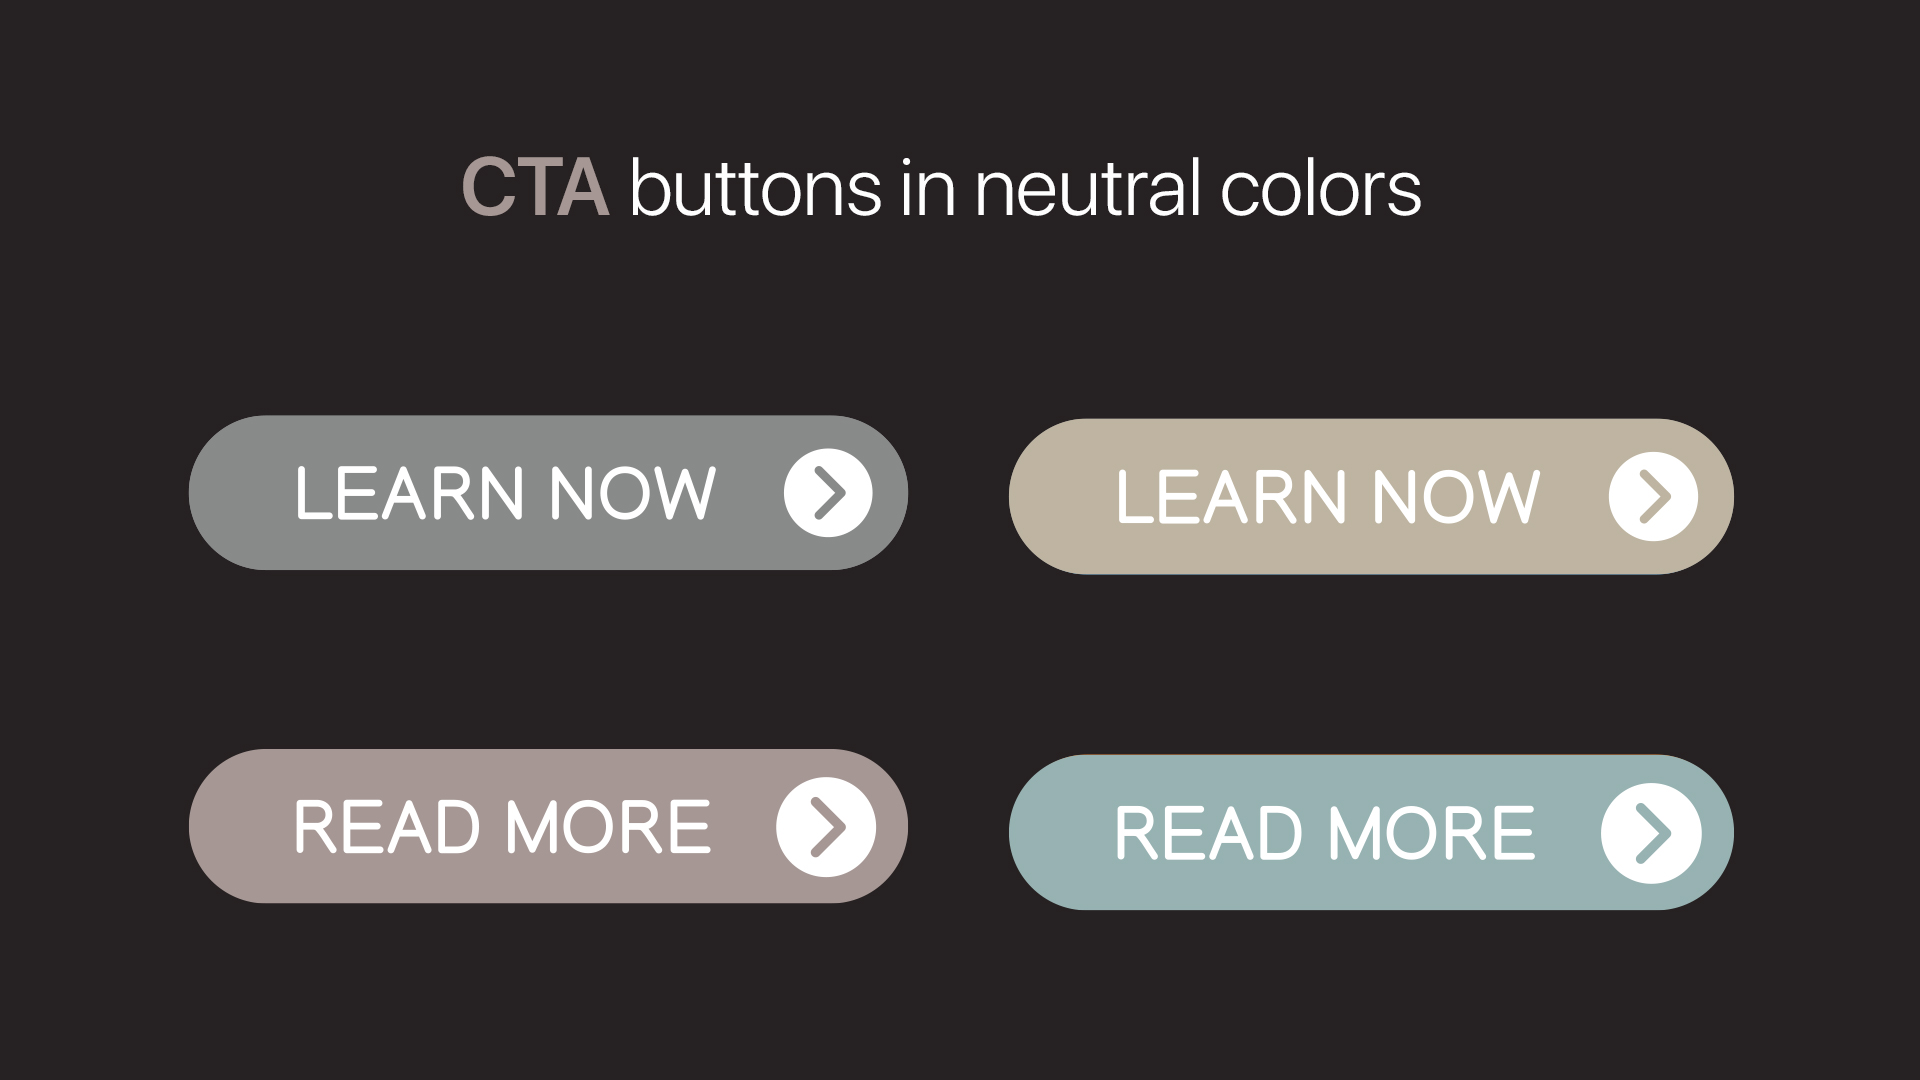 CTA buttons with neutral colors in the background